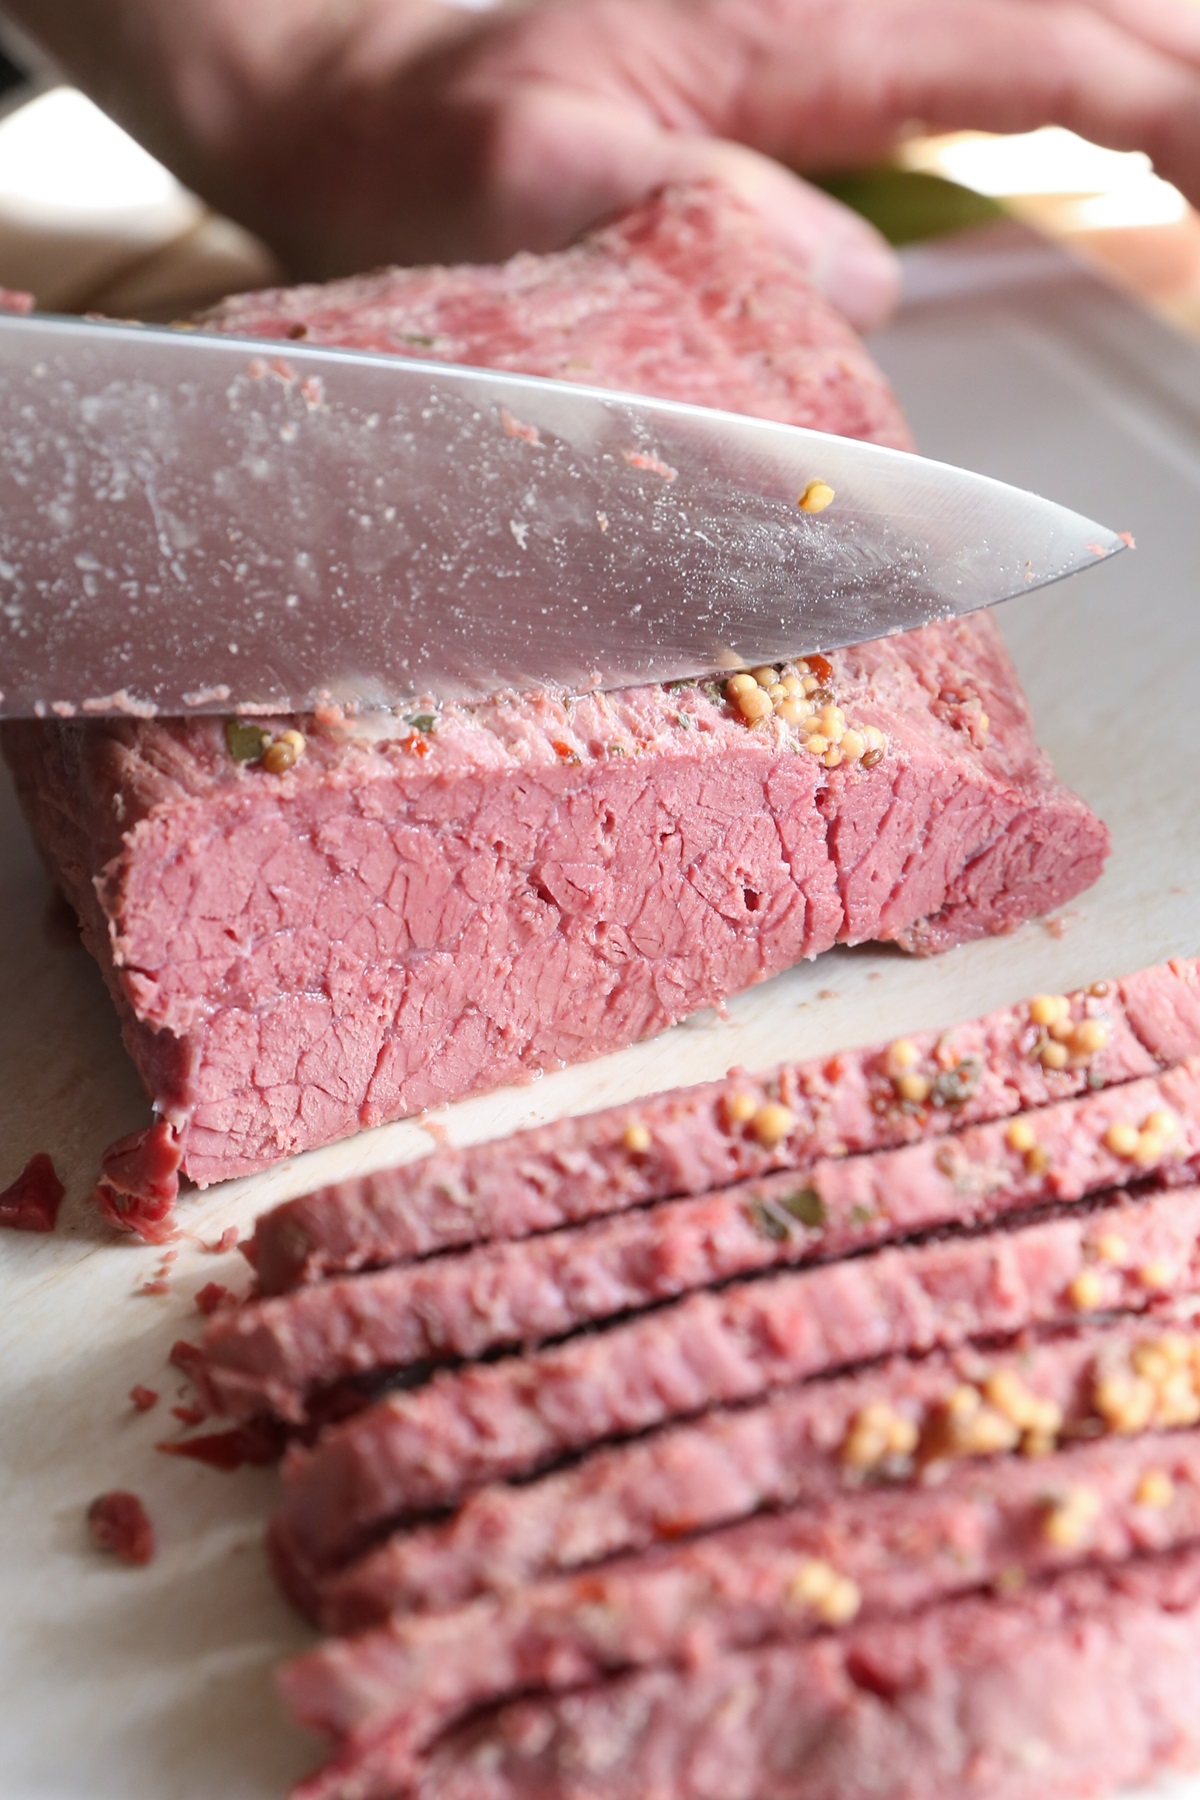 Corned beef on a cutting board, being cut into slices using a sharp knife.